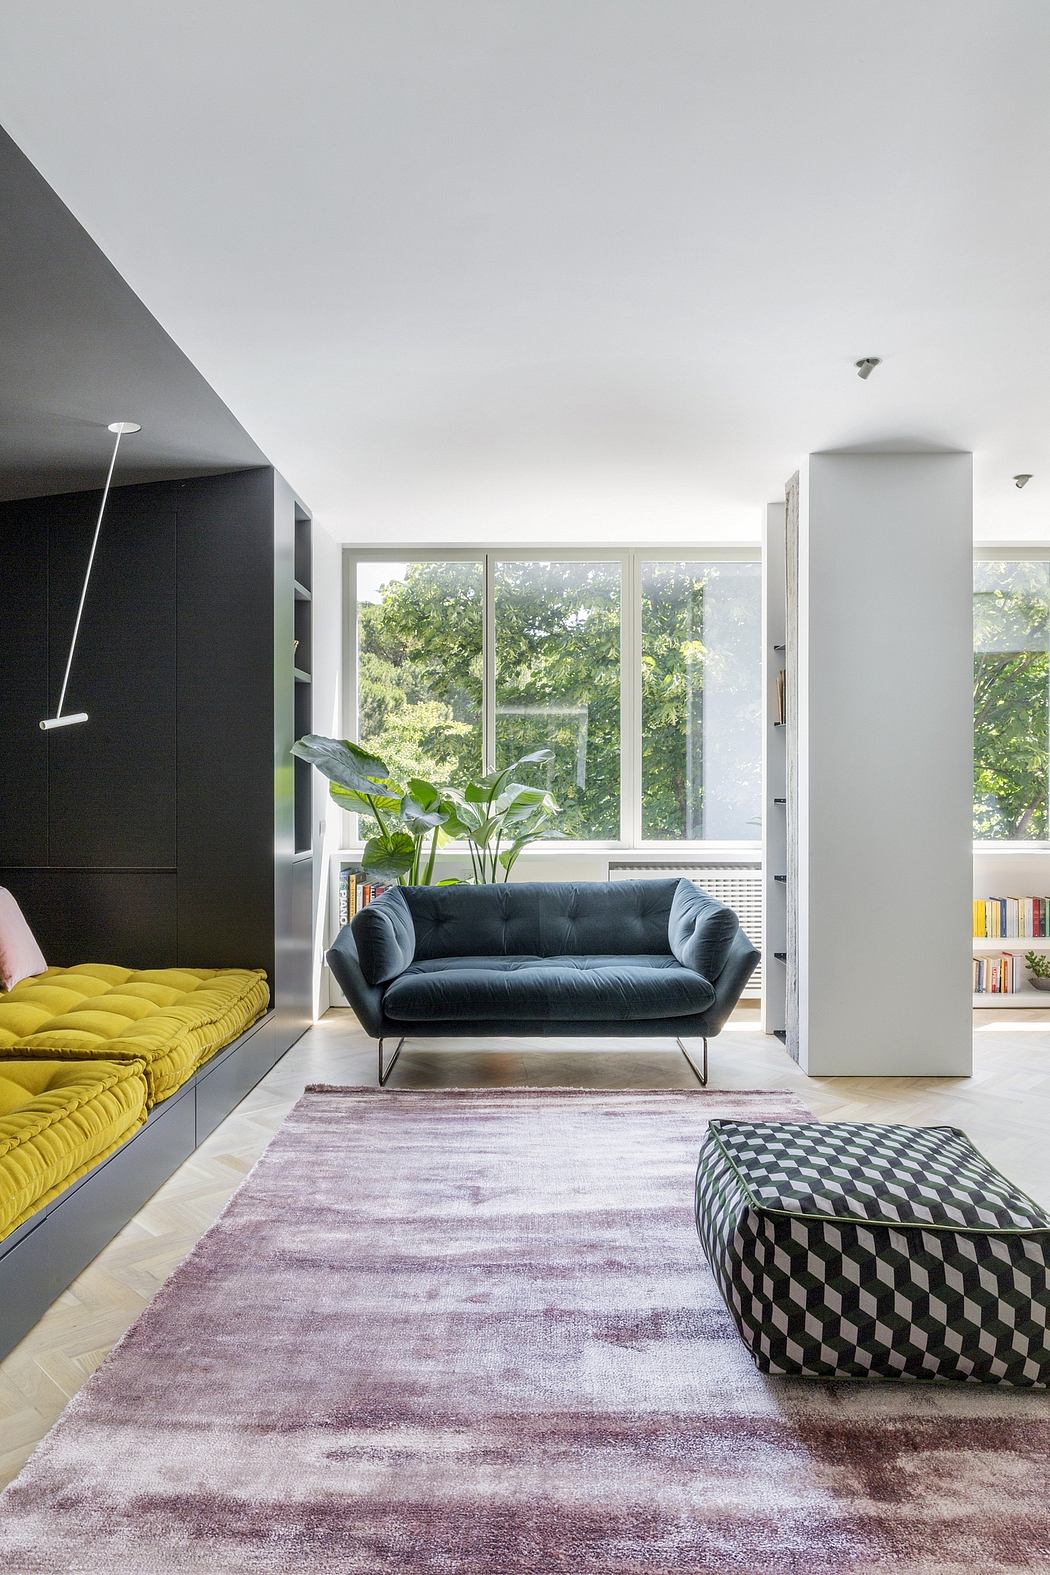 This Apartment For A Family Of Four Includes A Variety Of Creative Small Space Solutions